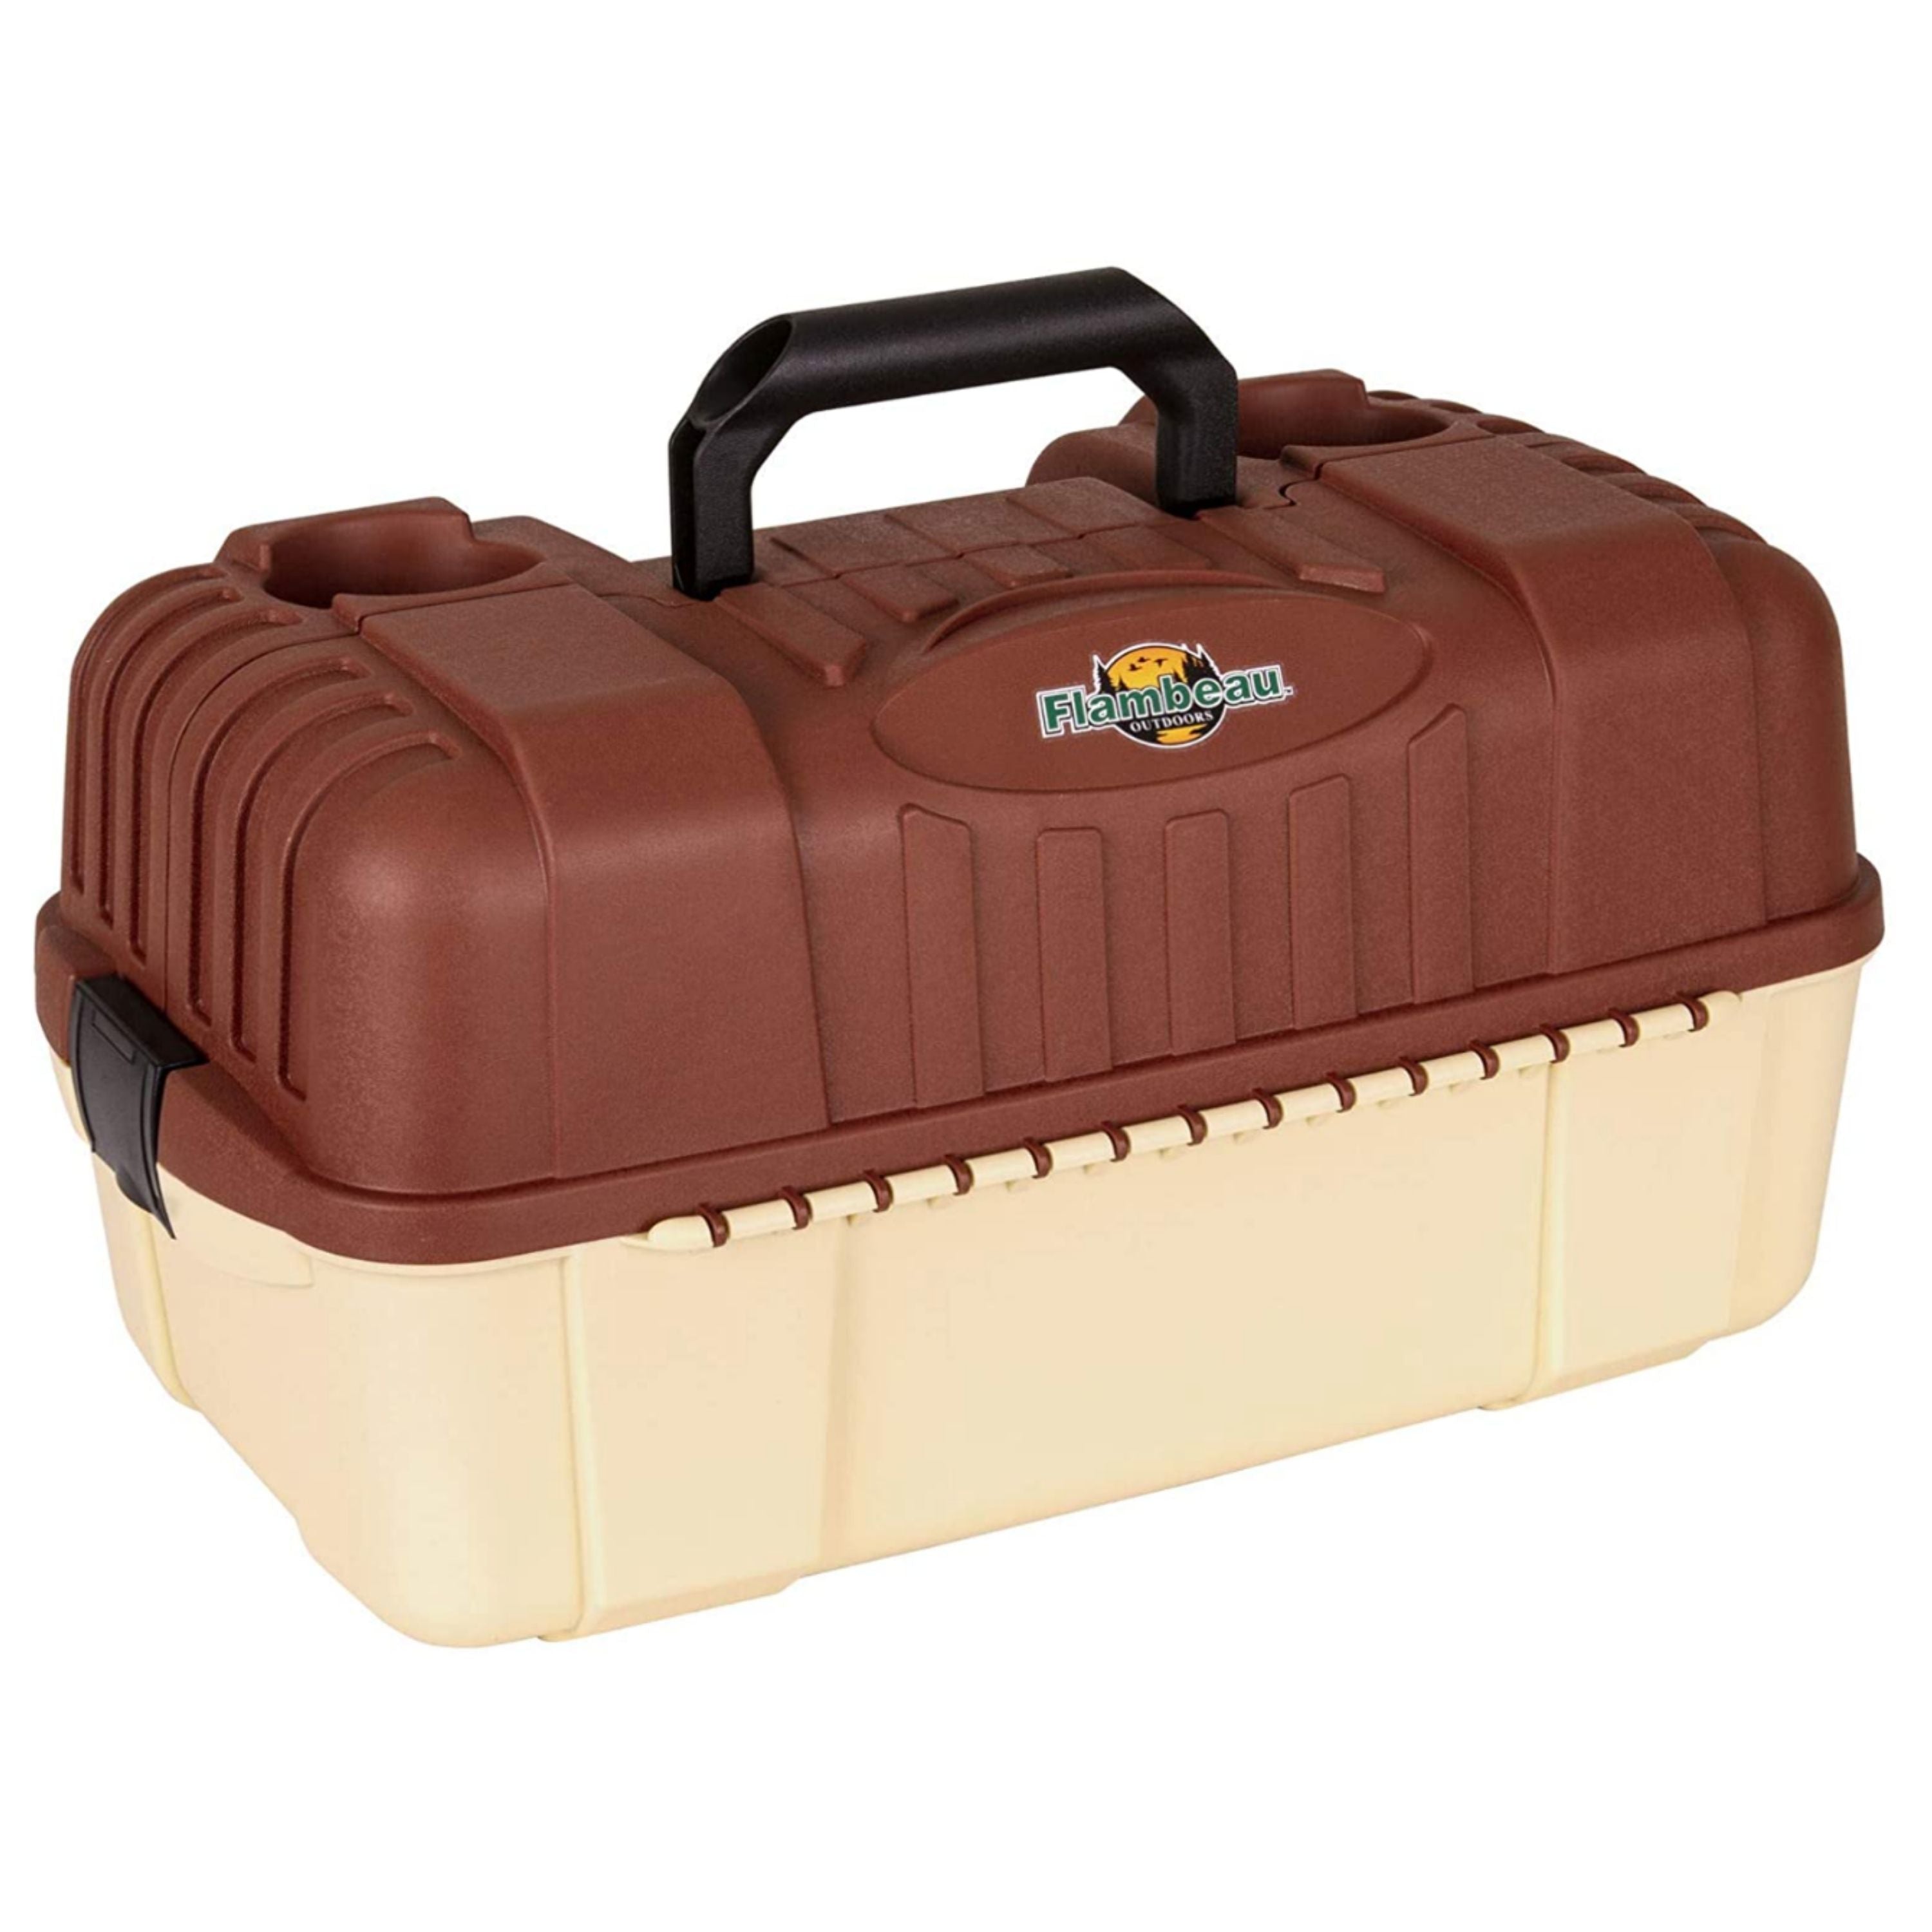 Gruv Fishing Tackle boxes - Canada